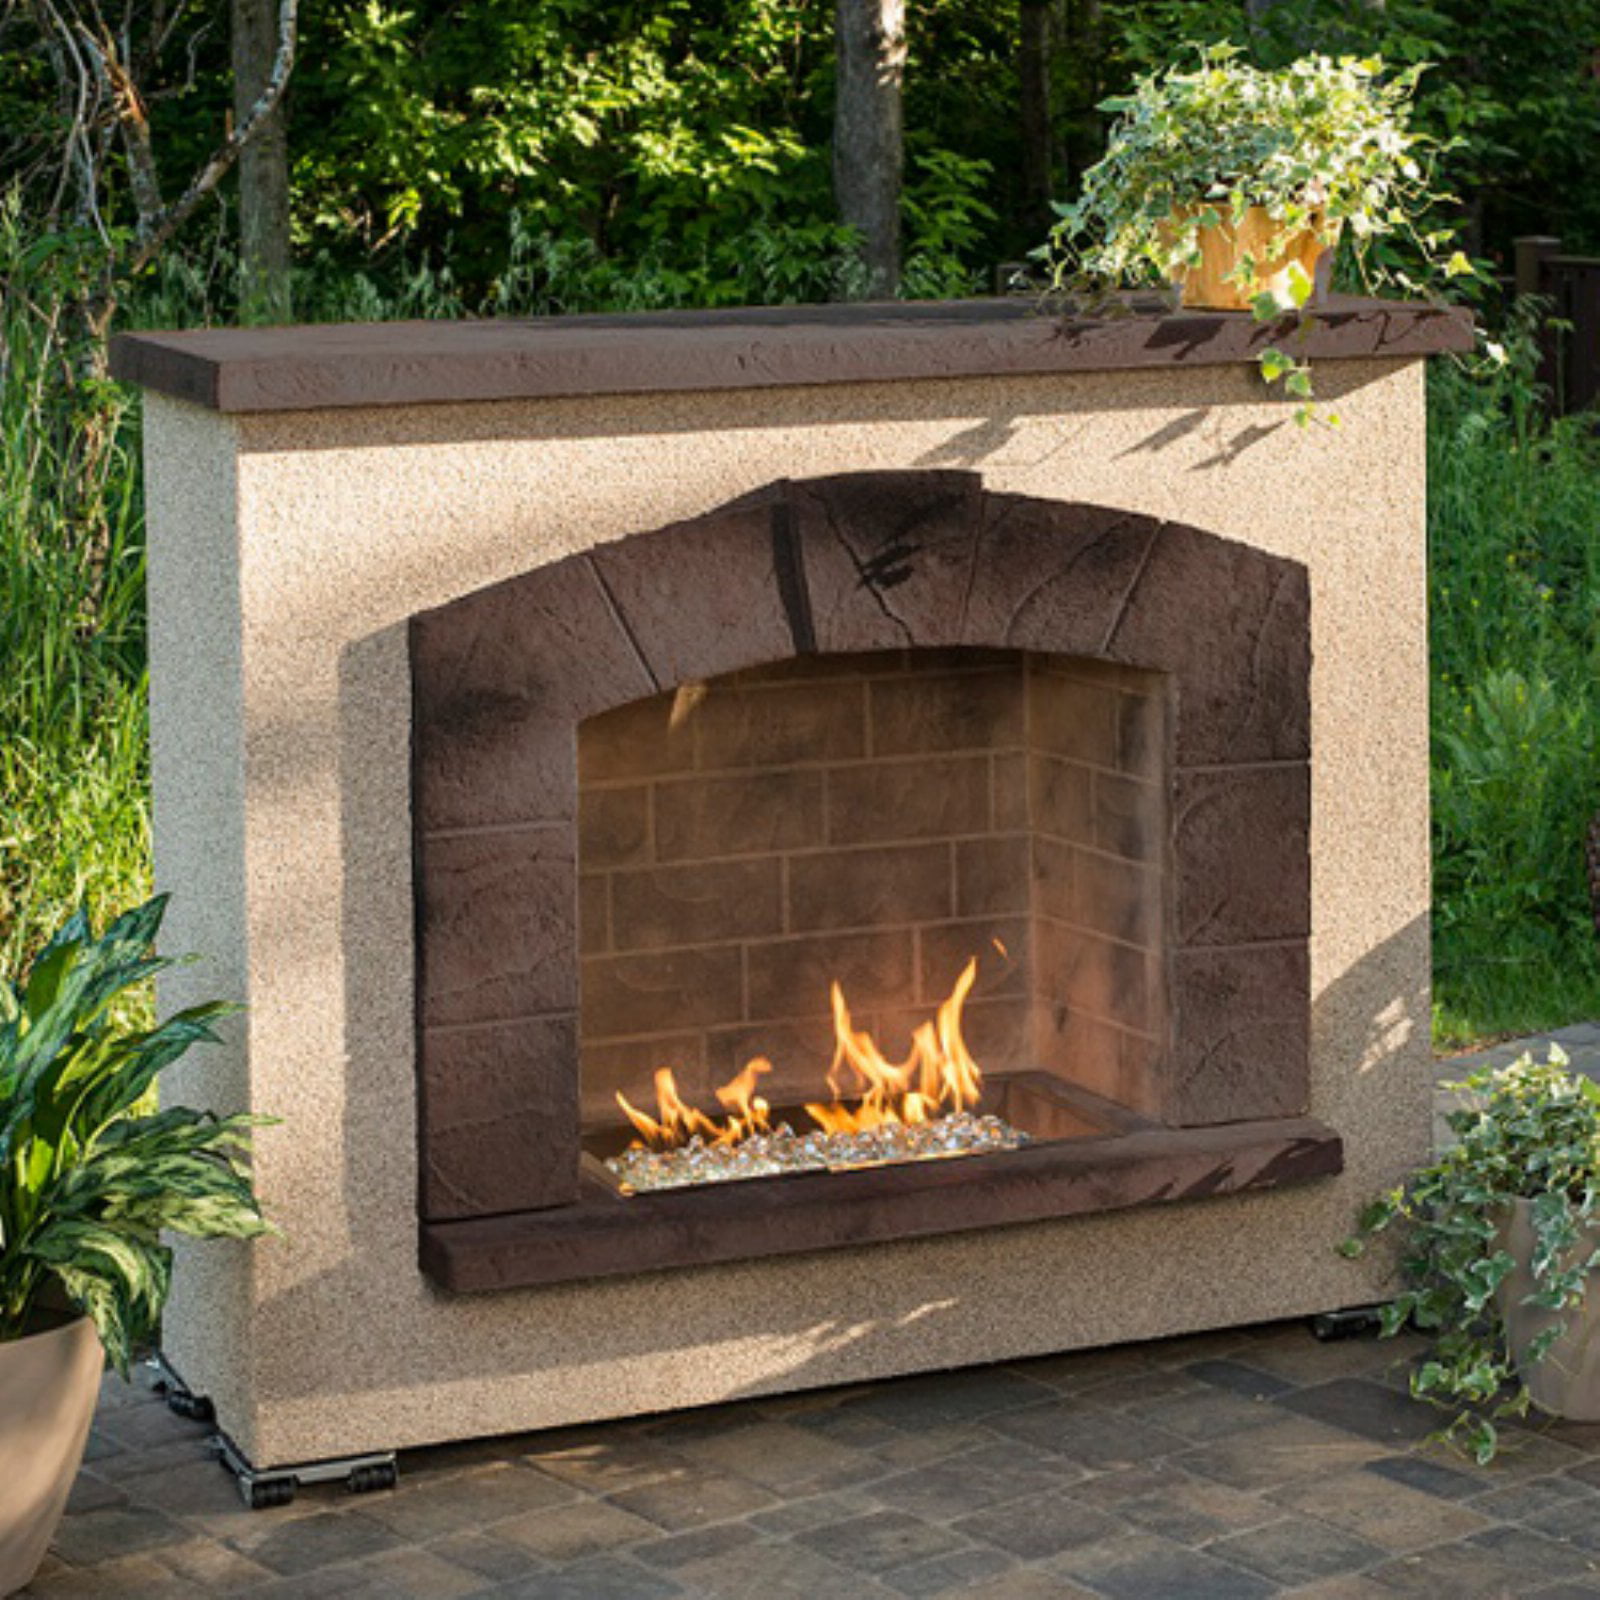 Outdoor Stone Patios And Fireplaces – Fireplace Guide by Linda